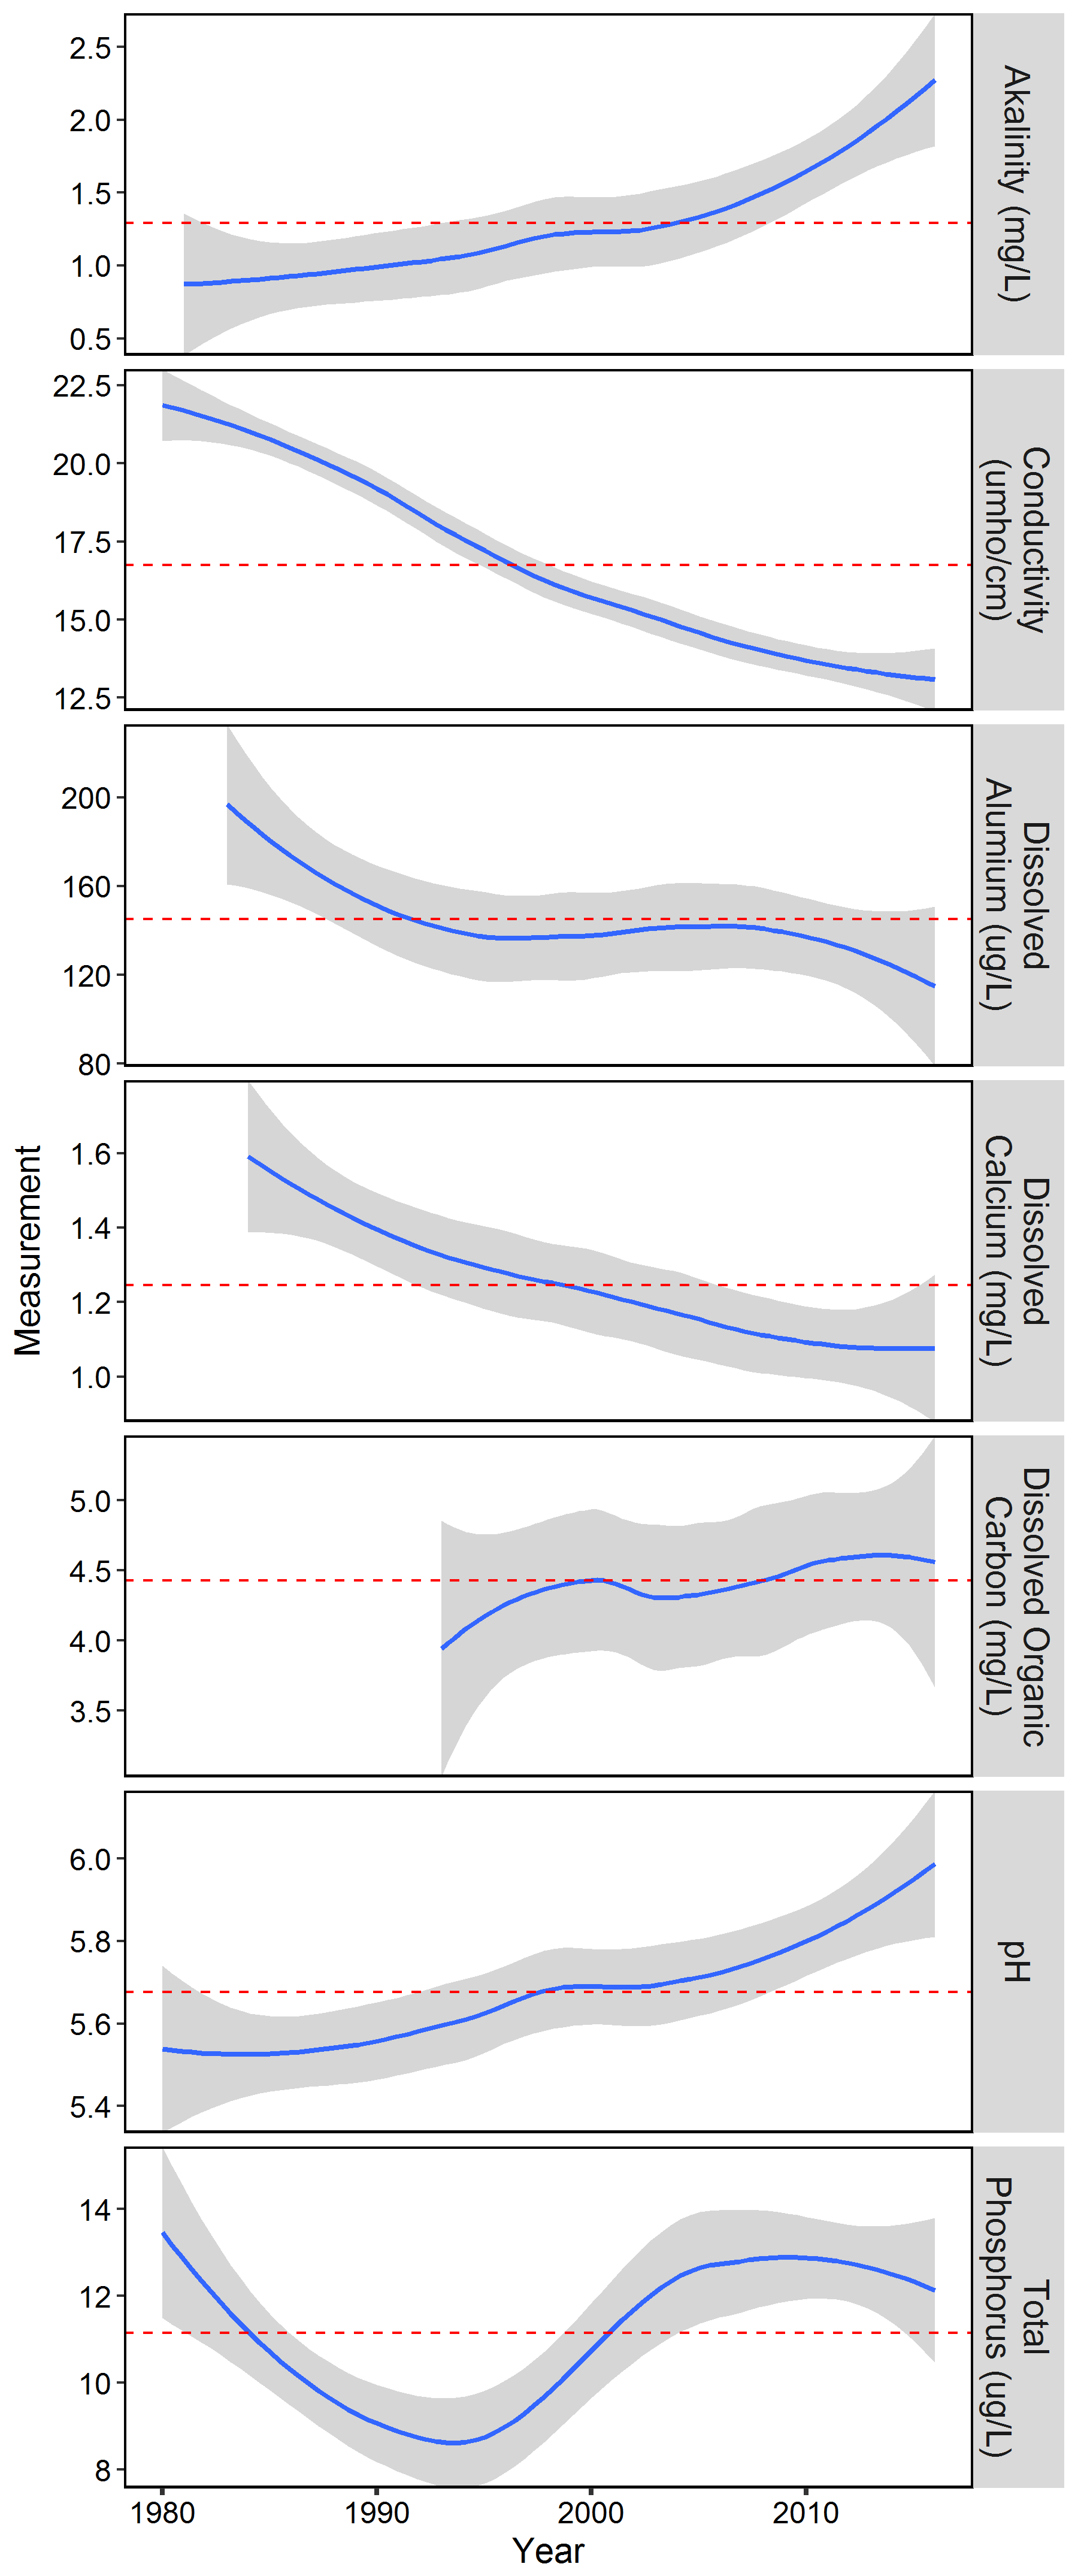 Average water quality measurements for 11 lakes/ponds in the VT Acid Lake Monitoring Program (blue line, smoothed with LOESS function), plus 95% confidence interval (grey shading). Red dashed line indicates the long-term average per measurement type.